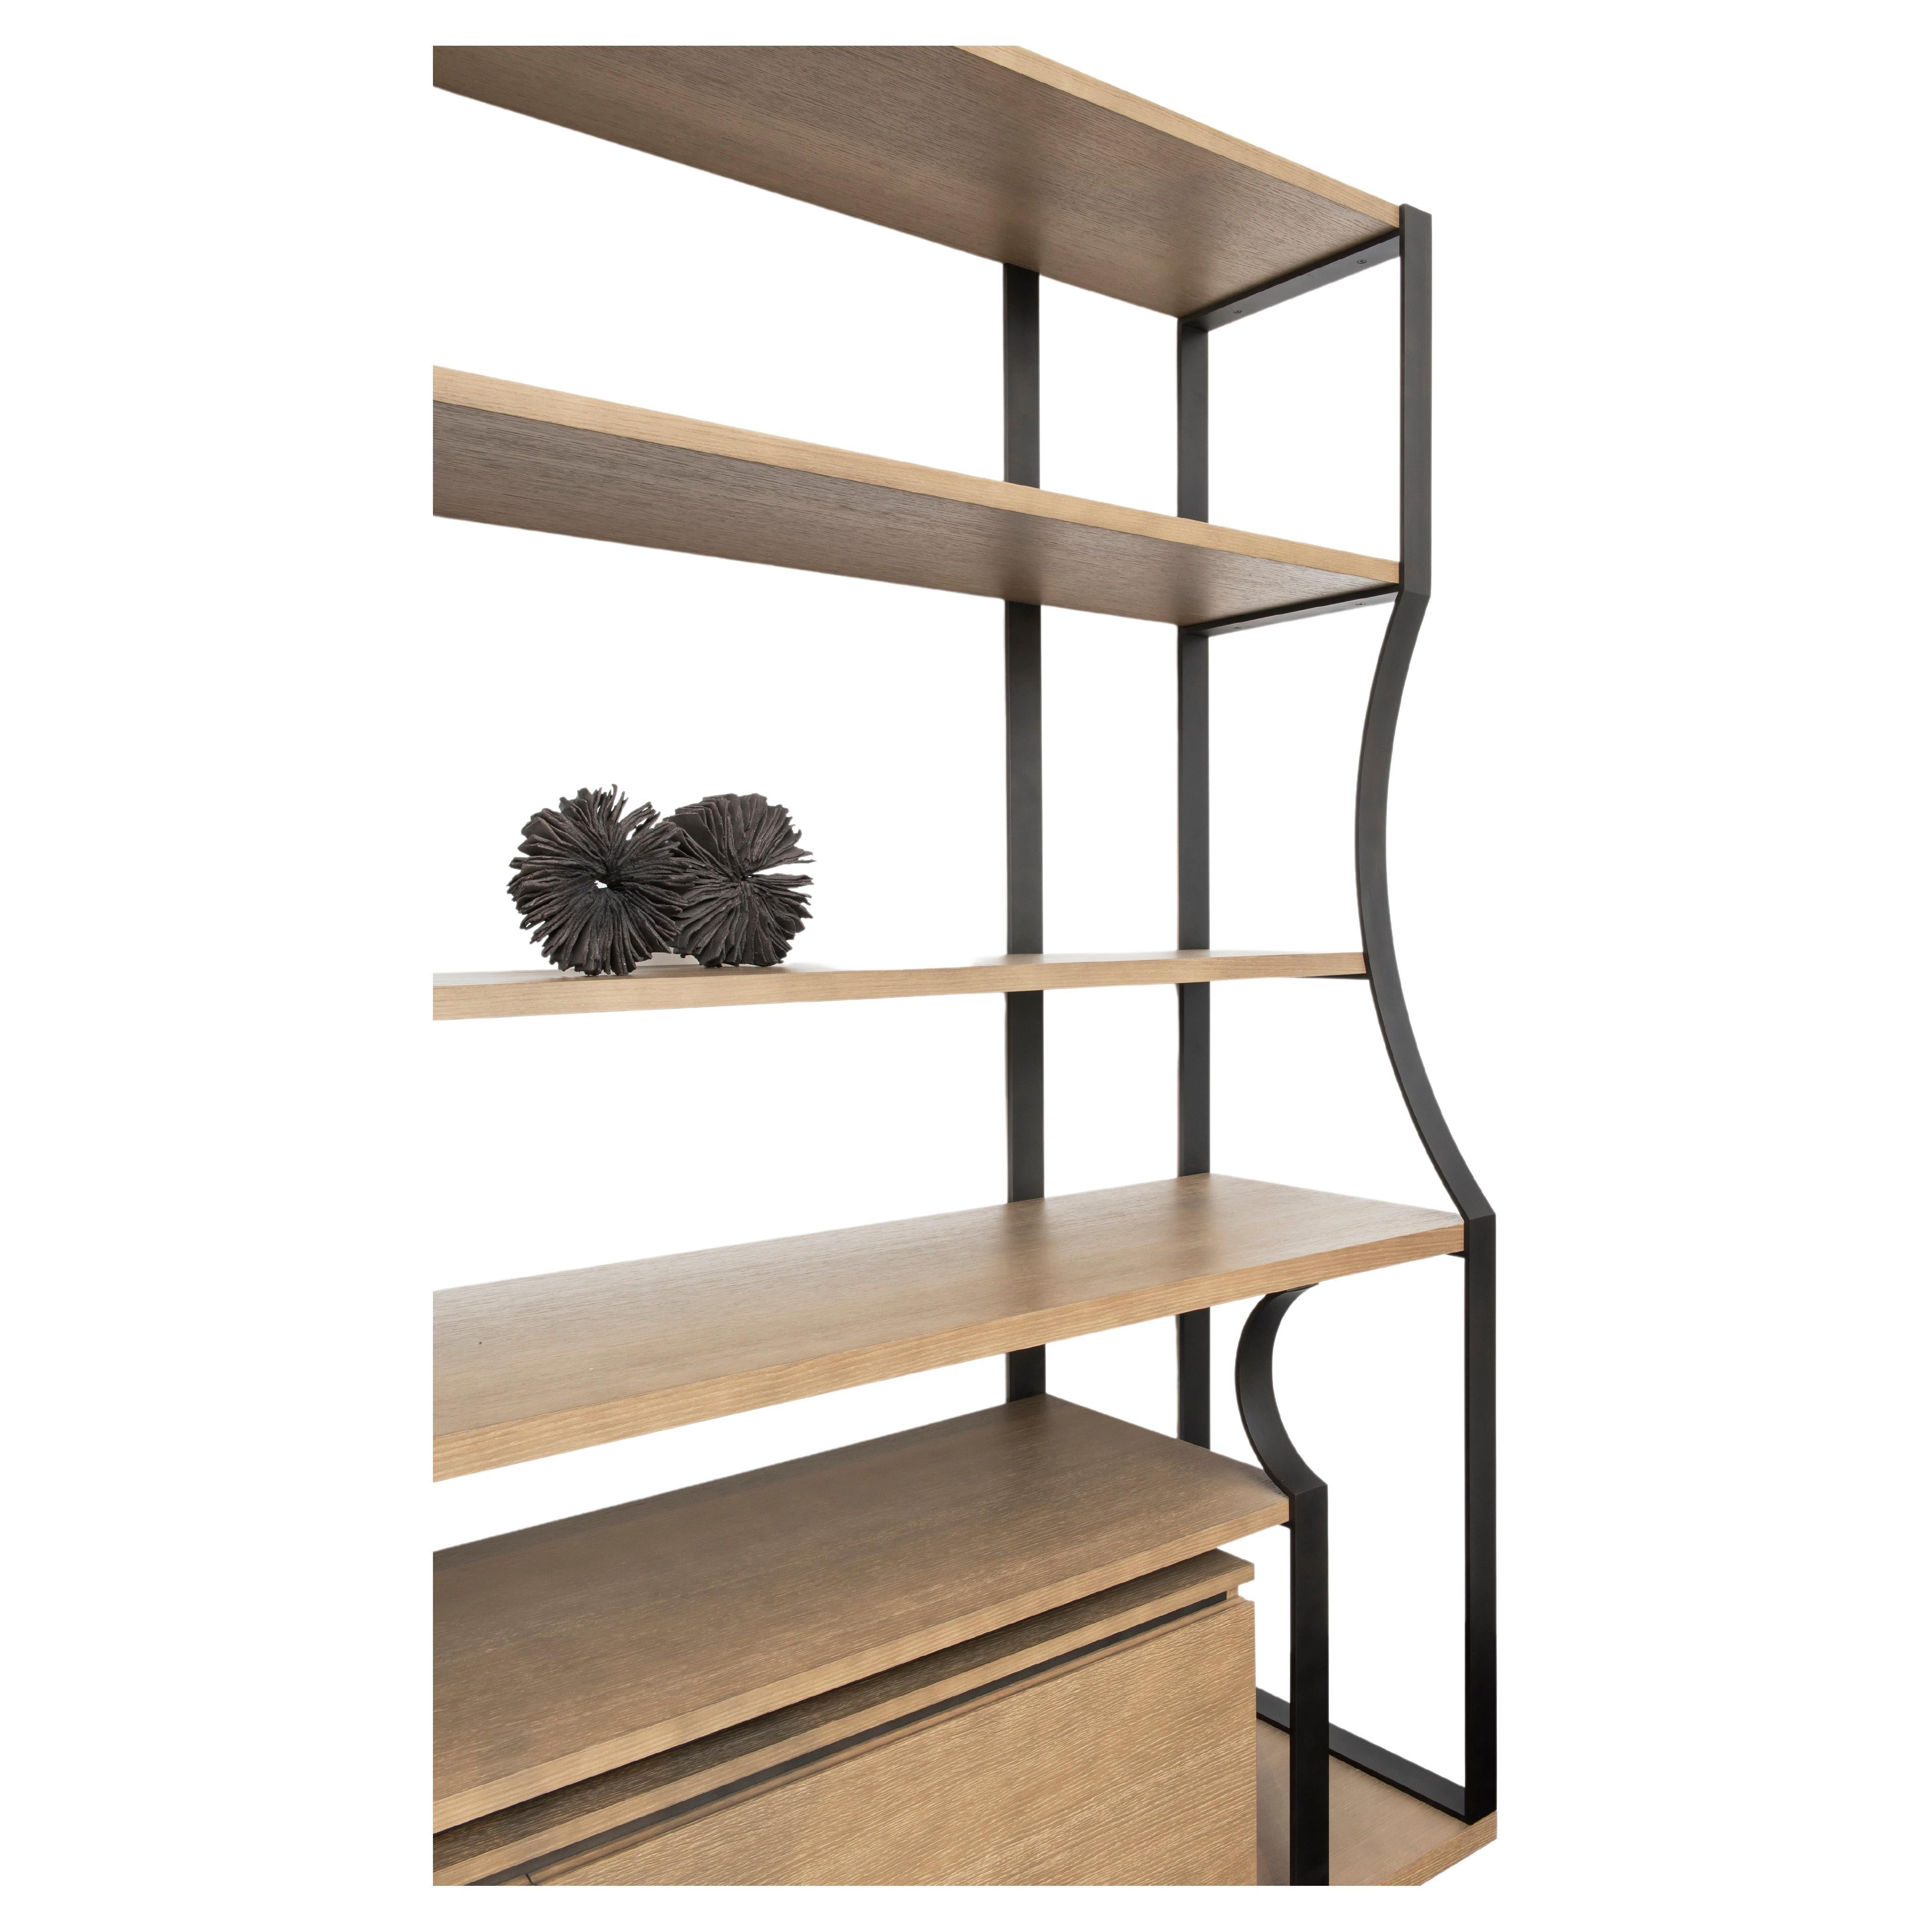 Bookcase designed by the Atelier Linné collective, with shelves made of oak and a structure made of steel. It is characterized by its sleek and flexible design and includes two cupboards in the lower part.

Atelier Linné is a collective of